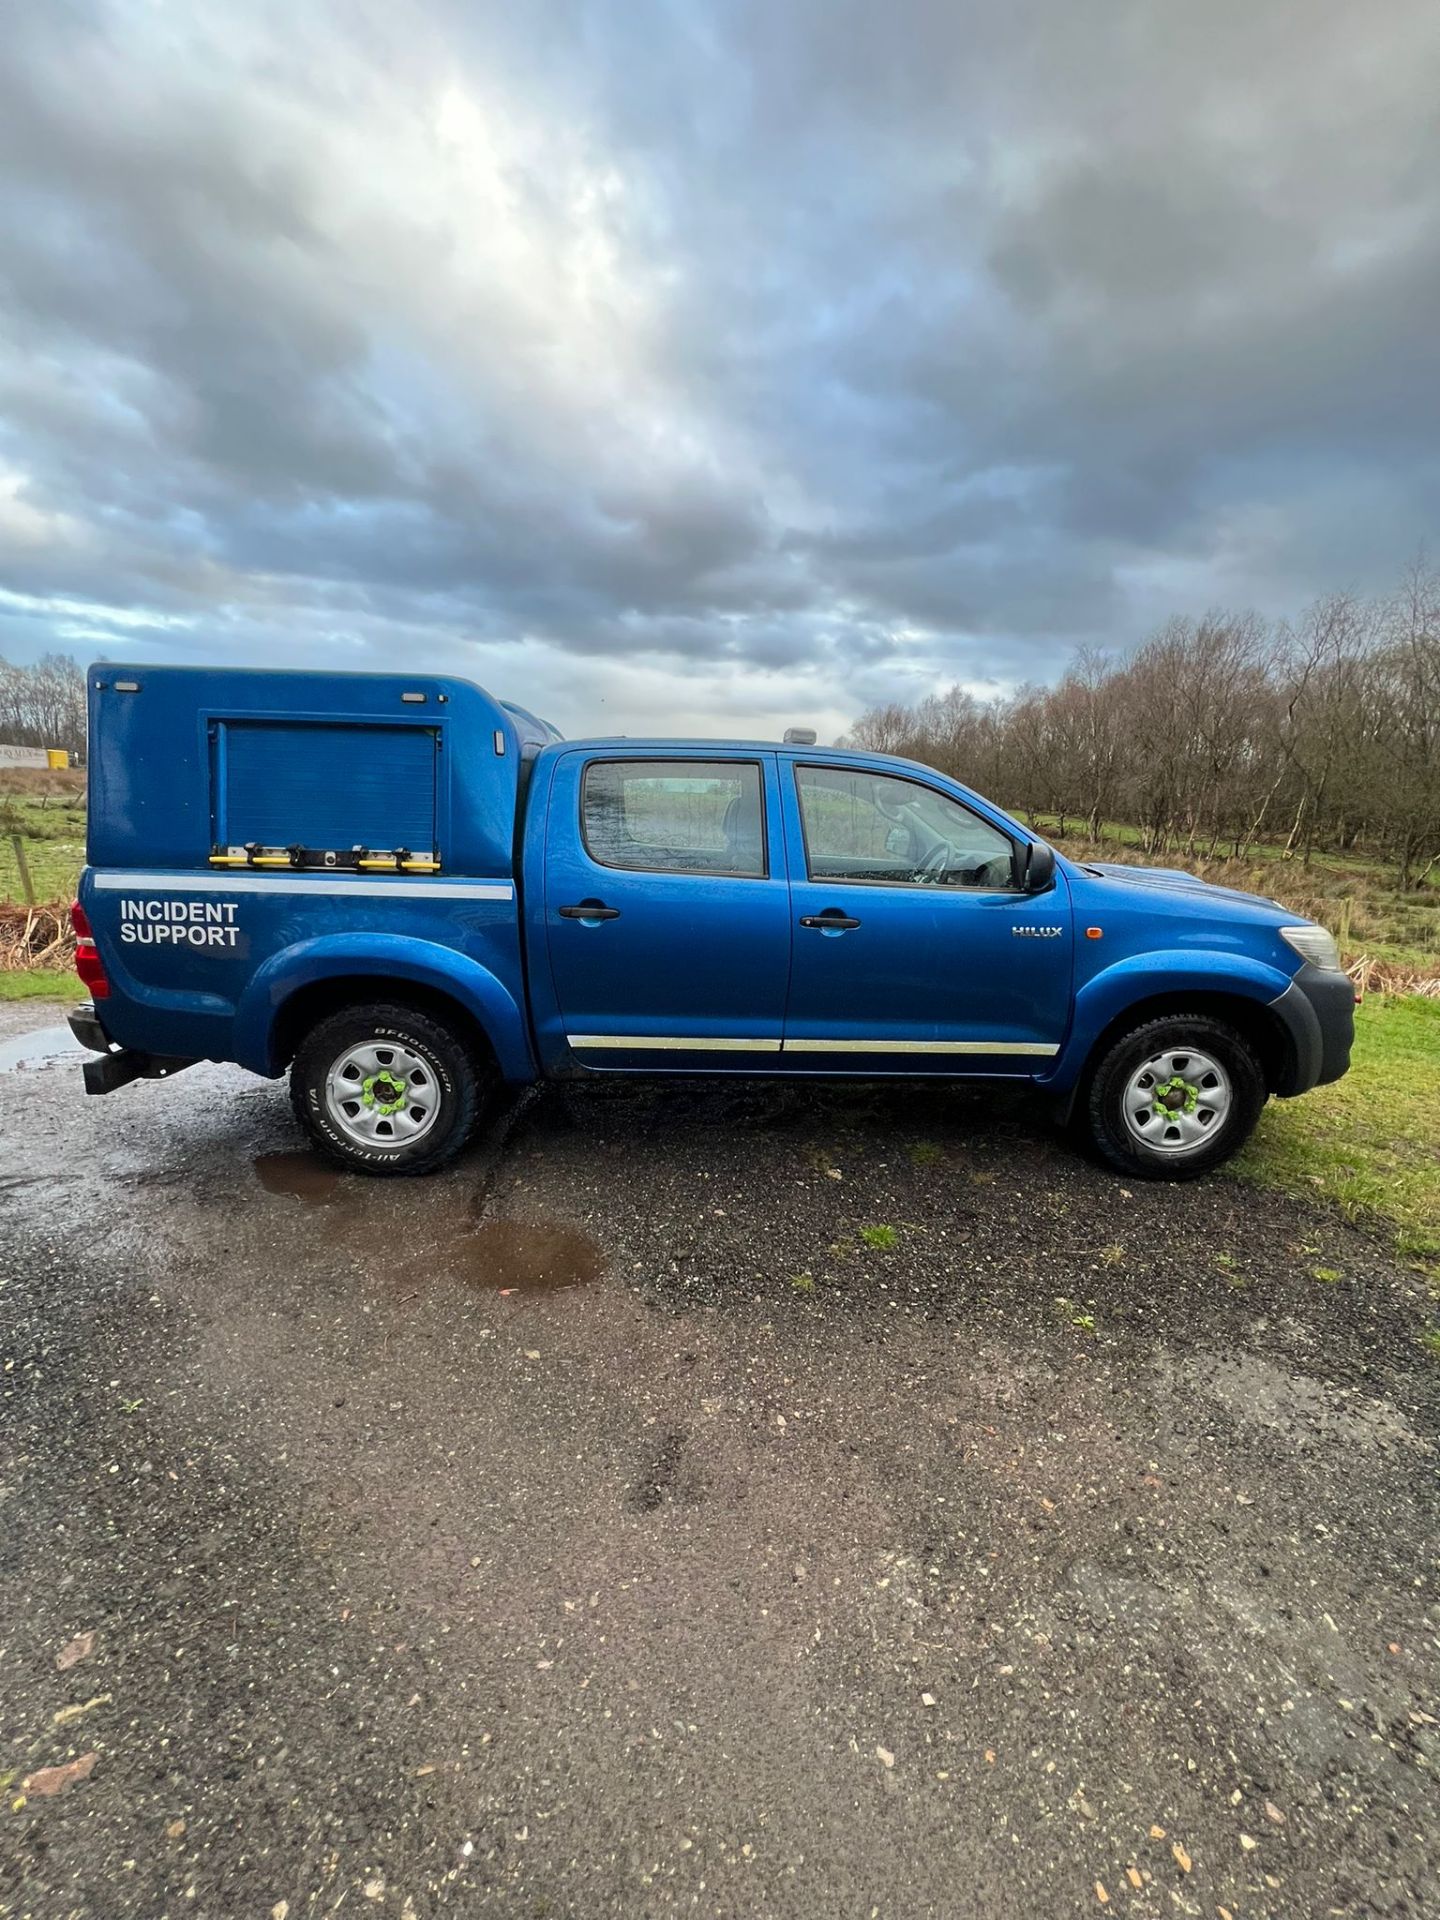 TOYOTA HILUX 91K MILES READY TO DRIVE AWAY